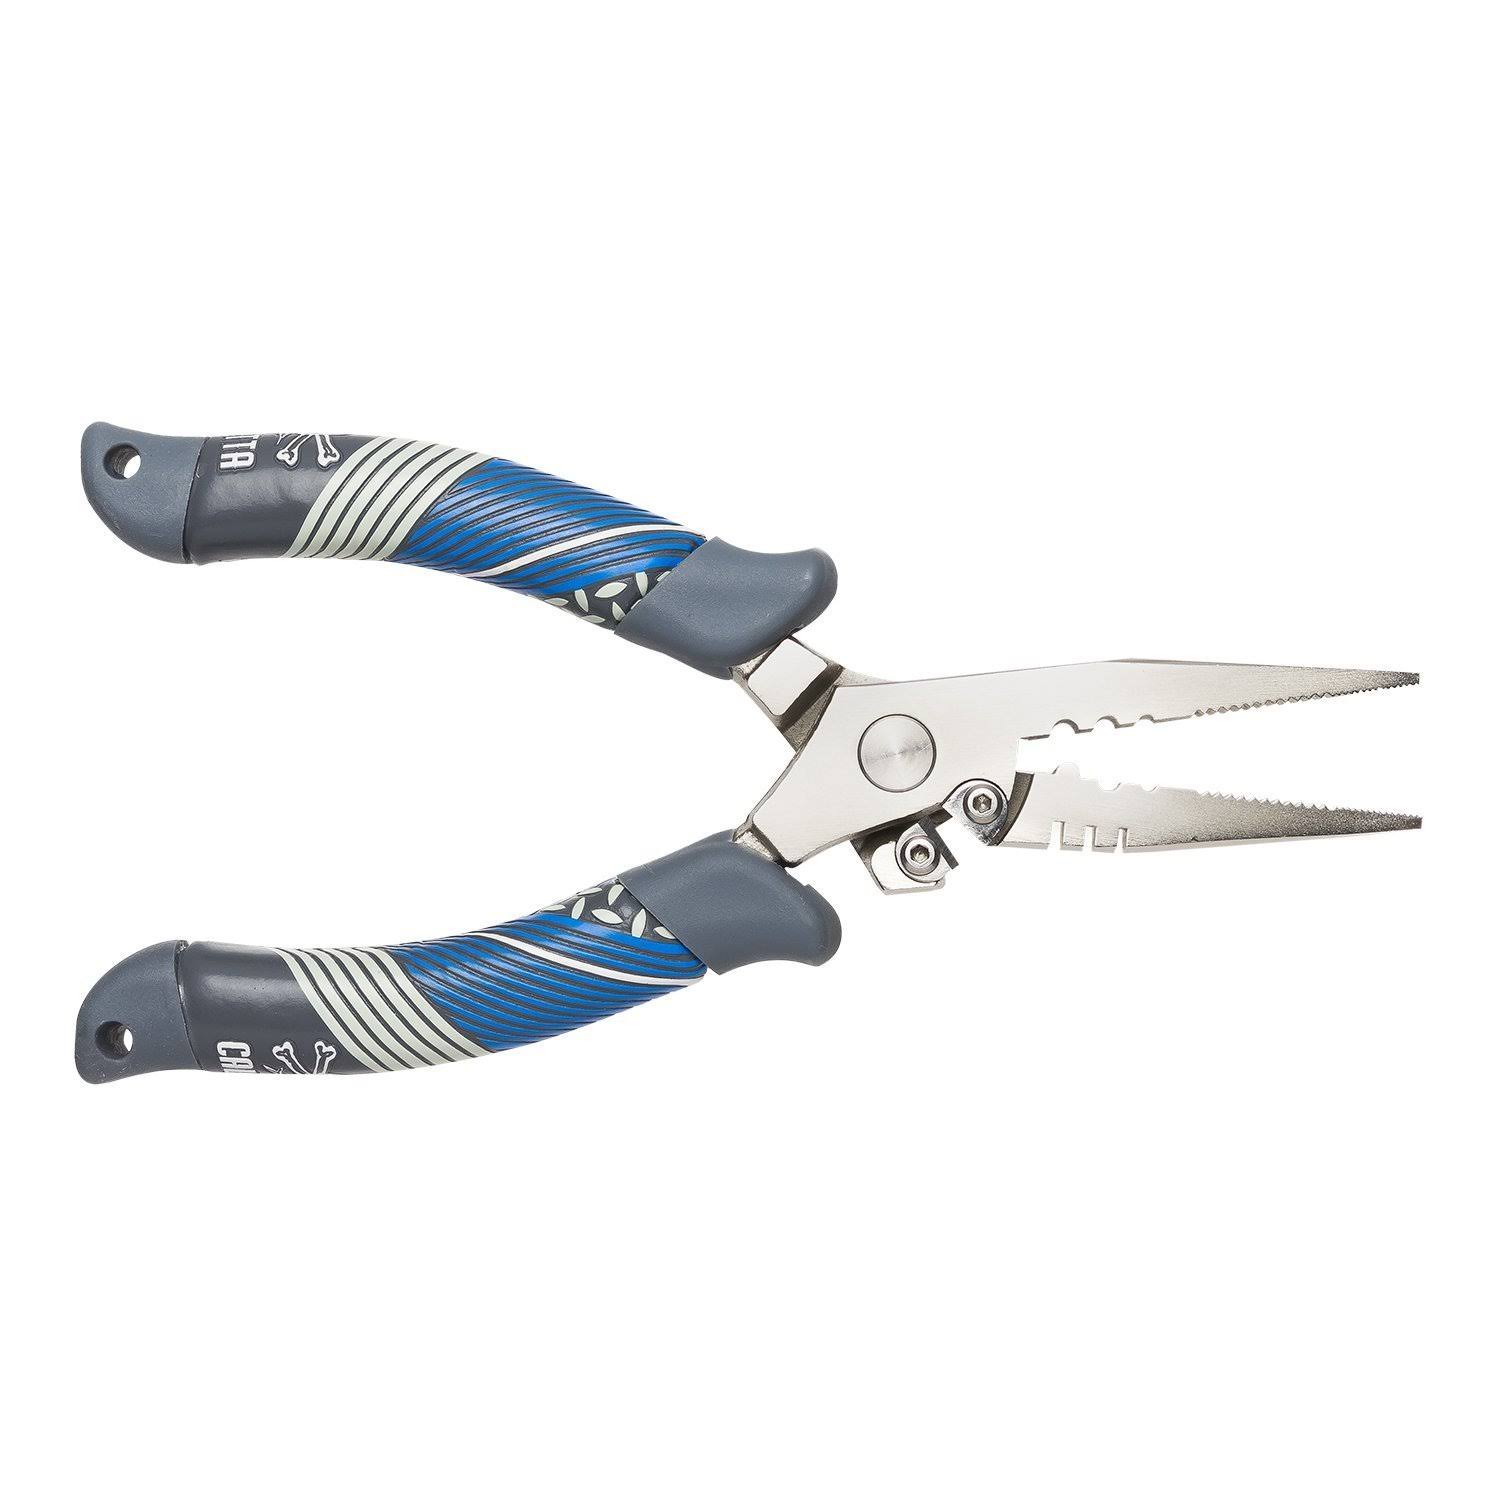 Calcutta CSDFS0403 Squall Torque Series Stainless Steel Plier with